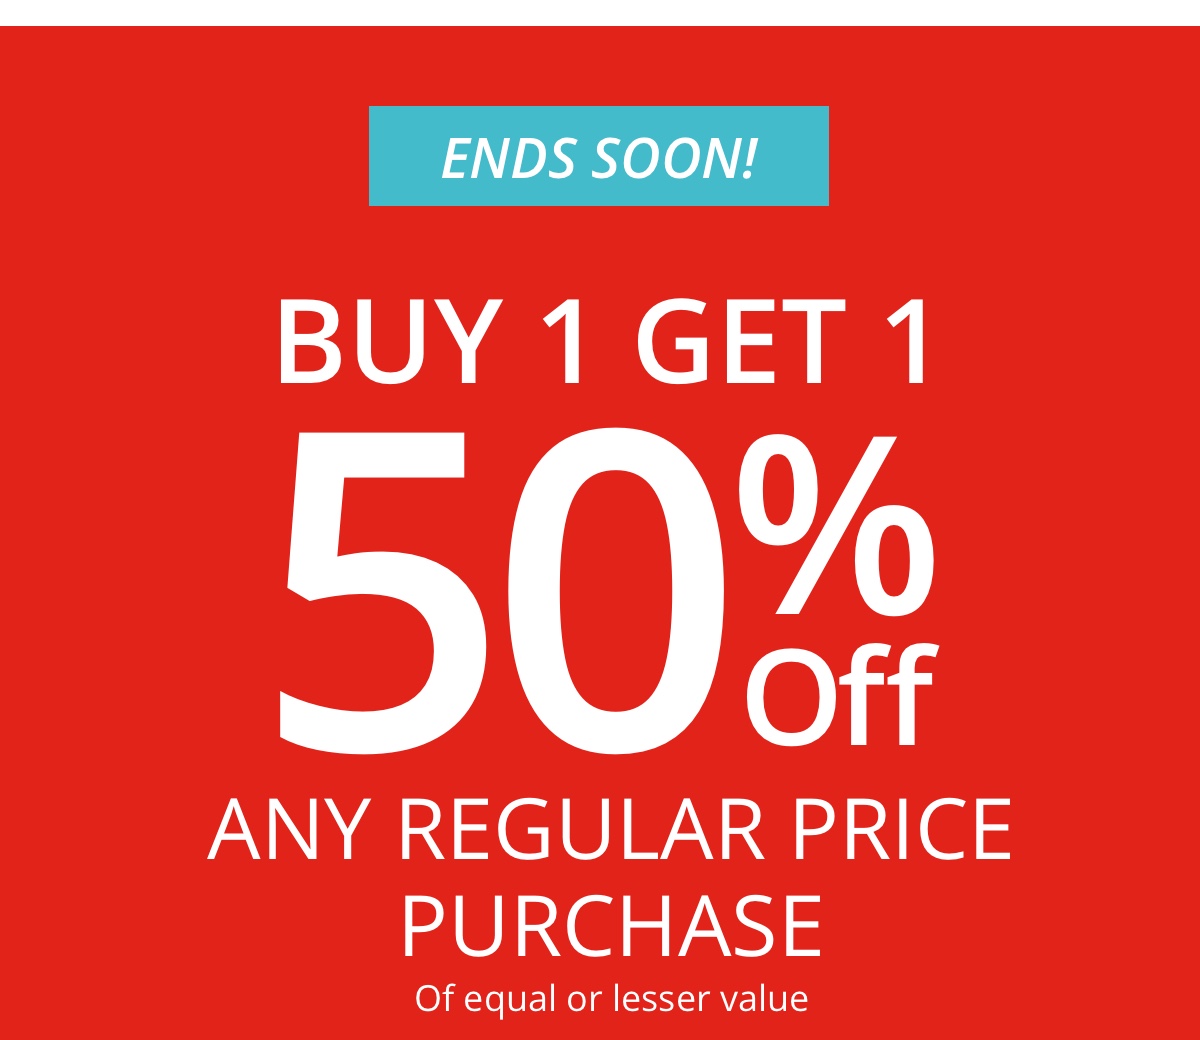 Ends Soon!|Buy 1 Get 1|50% Off| Any Regular Price Purchase|Of equal or lesser value